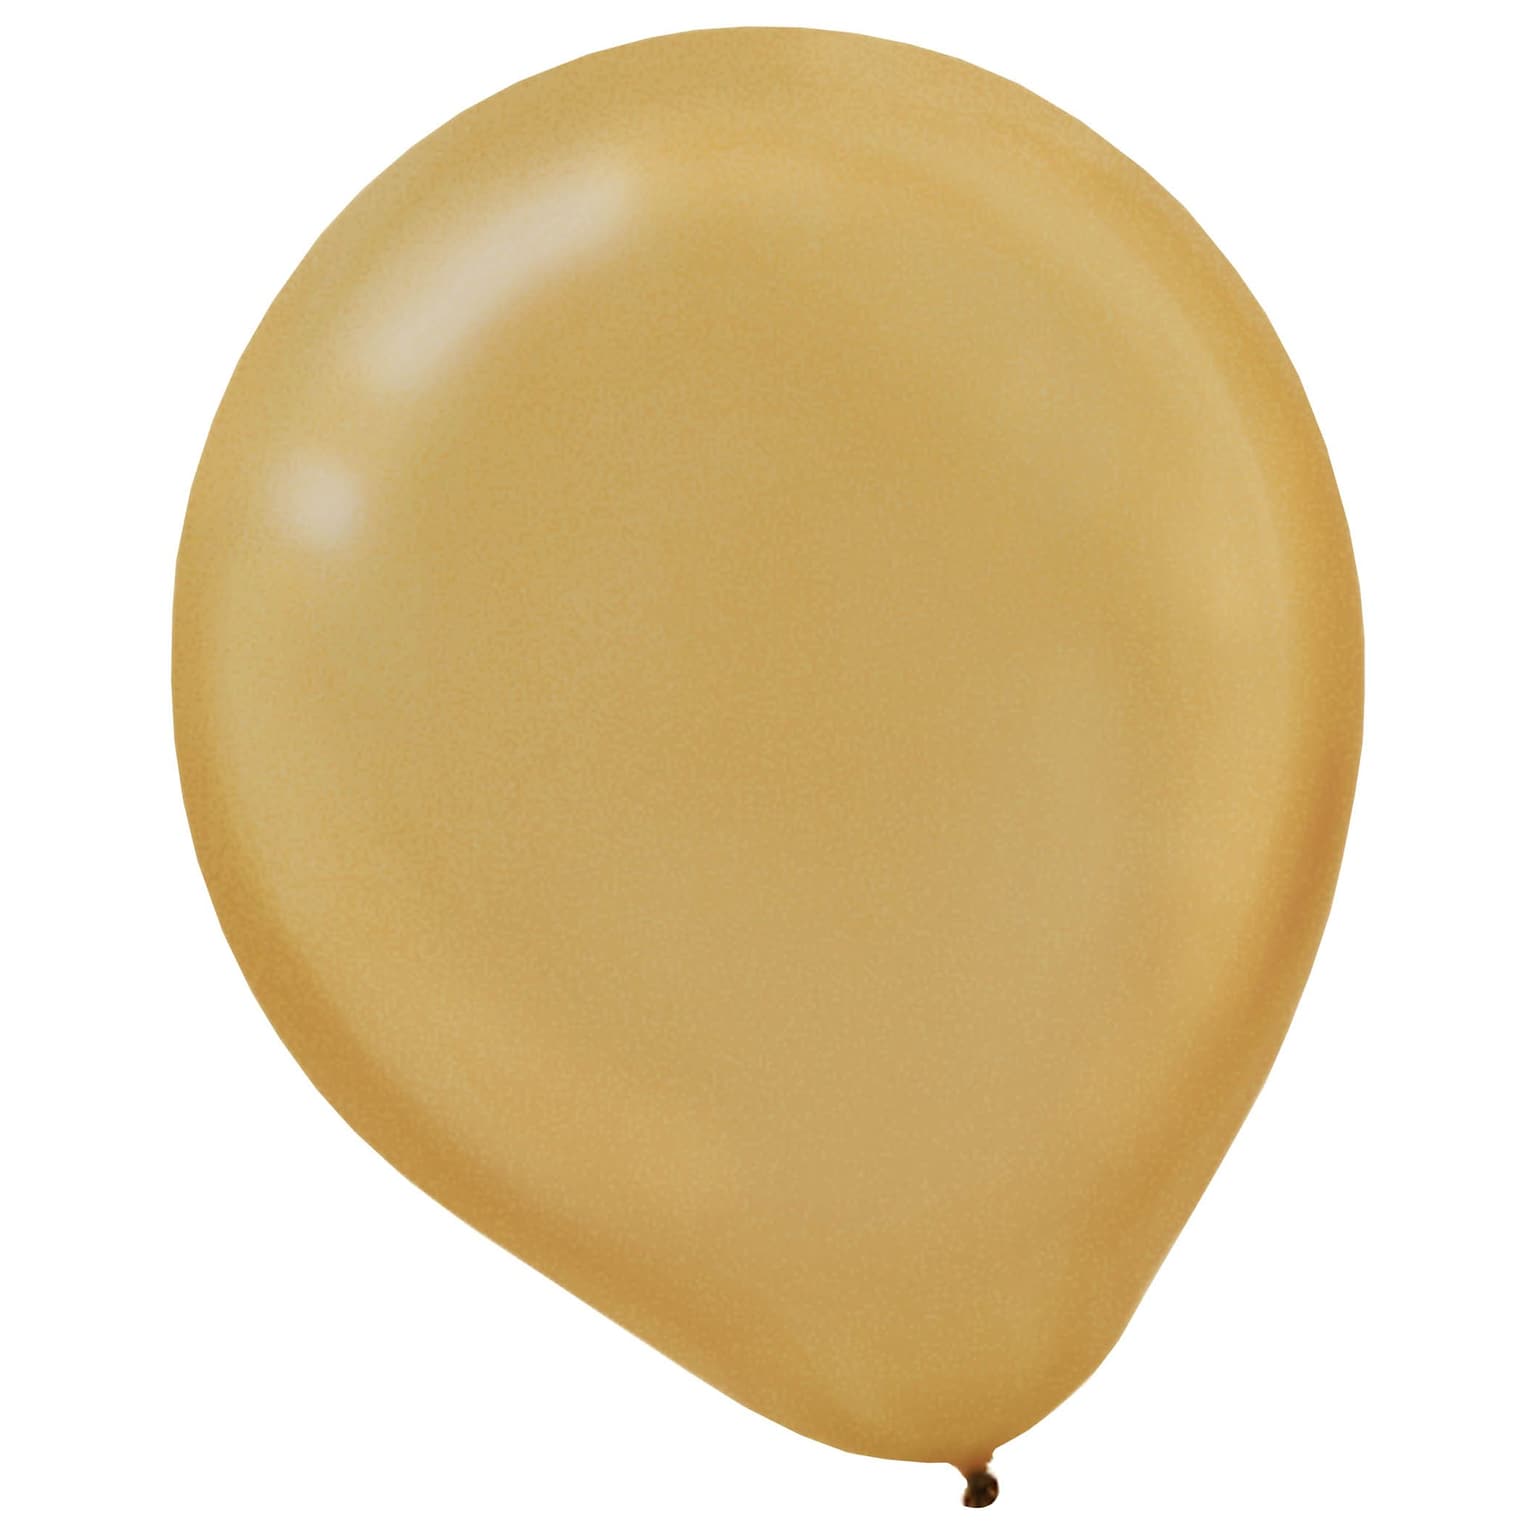 Amscan Pearlized Latex Balloons Packaged, 12, 16/Pack, Gold, 15 Per Pack (113253.19)